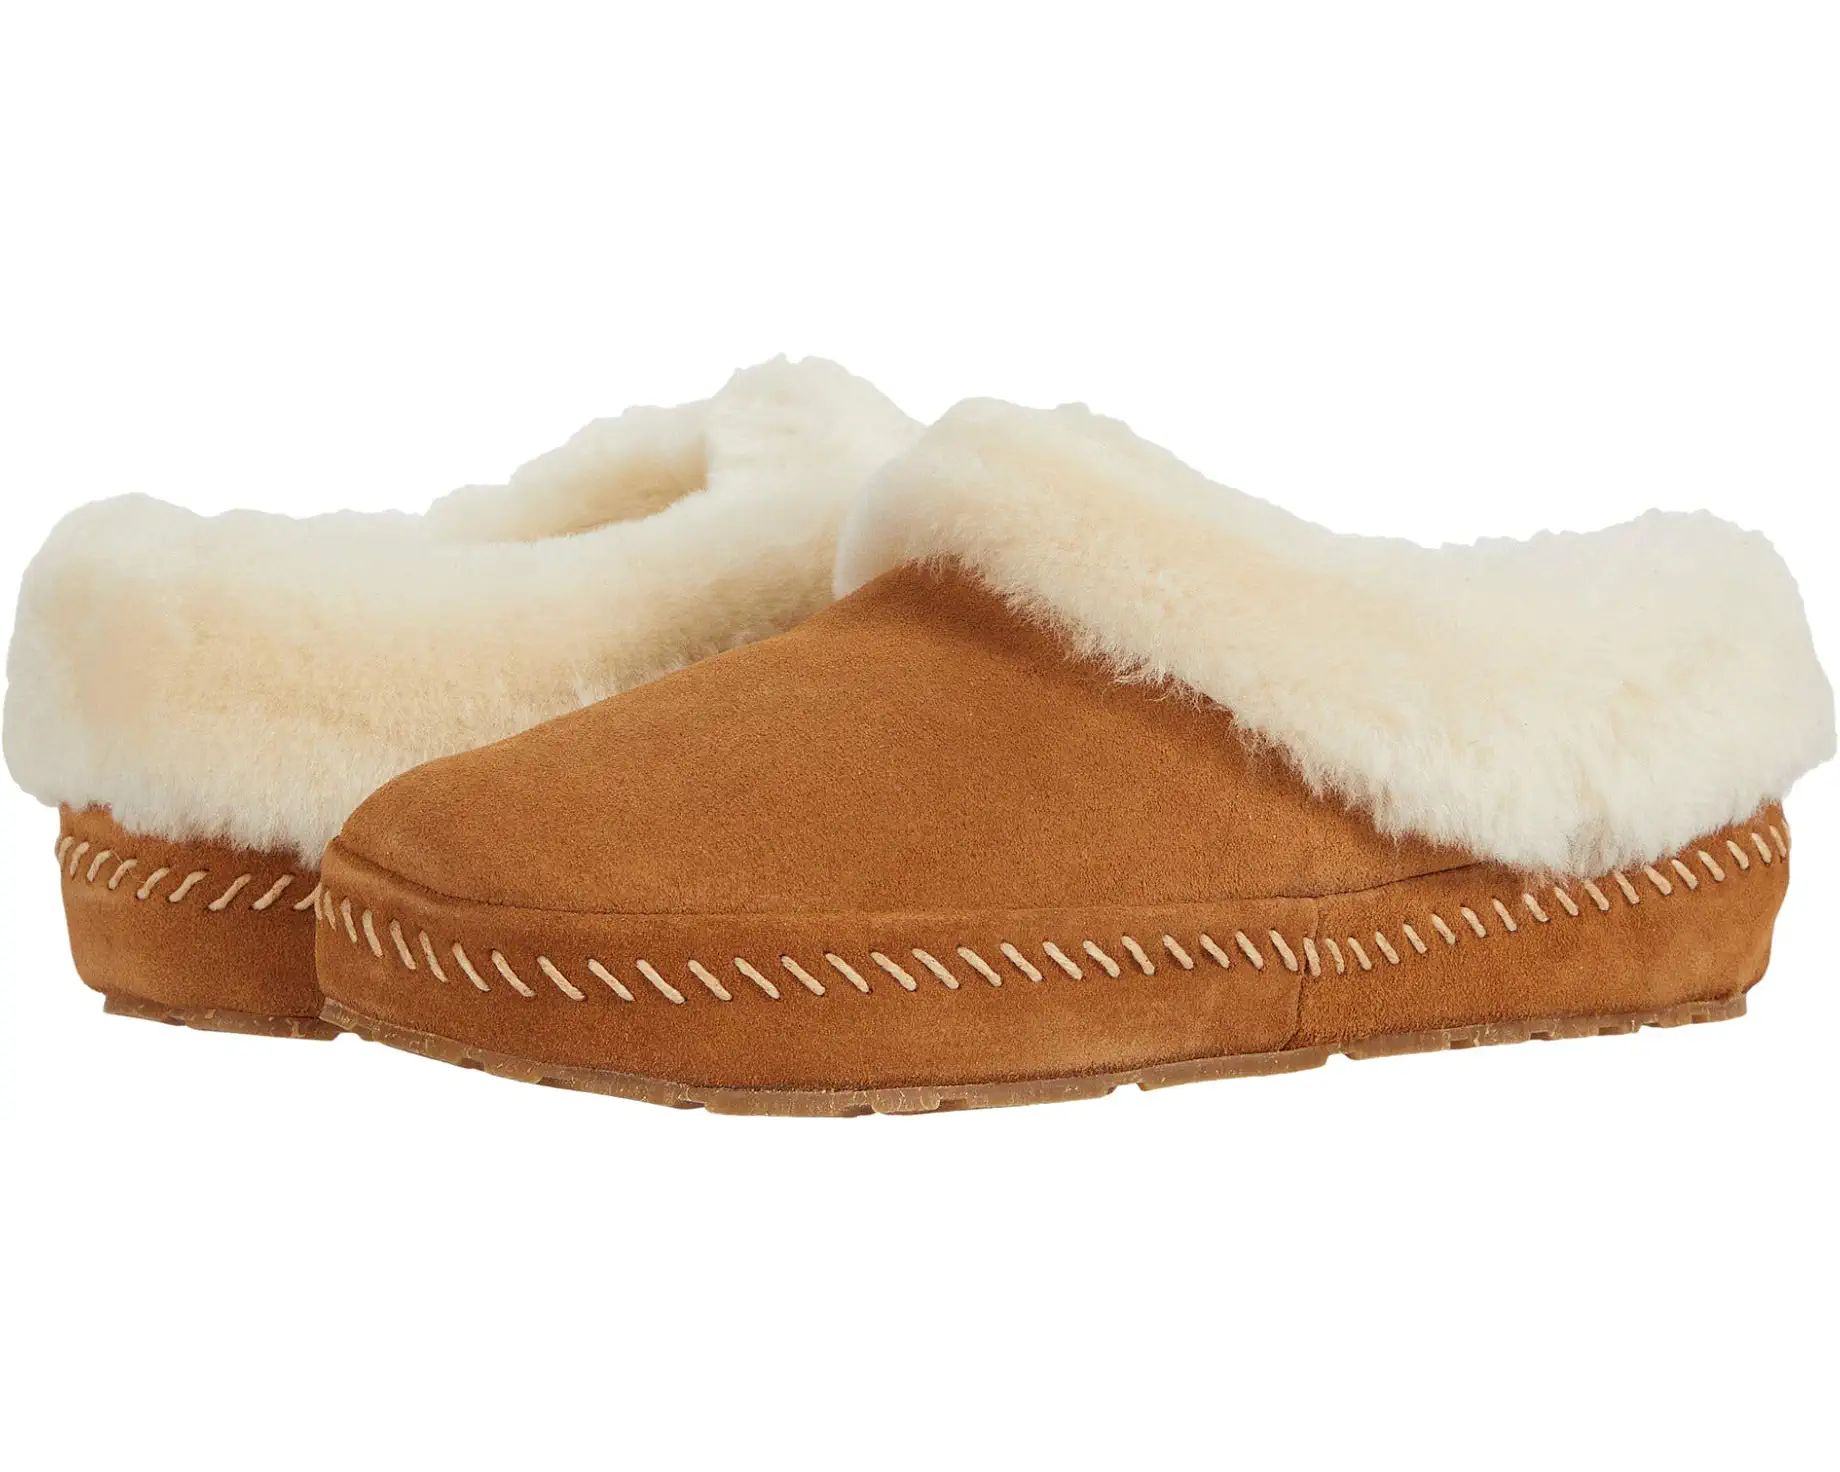 L.L.Bean Wicked Good Slippers Squam Lake | Zappos